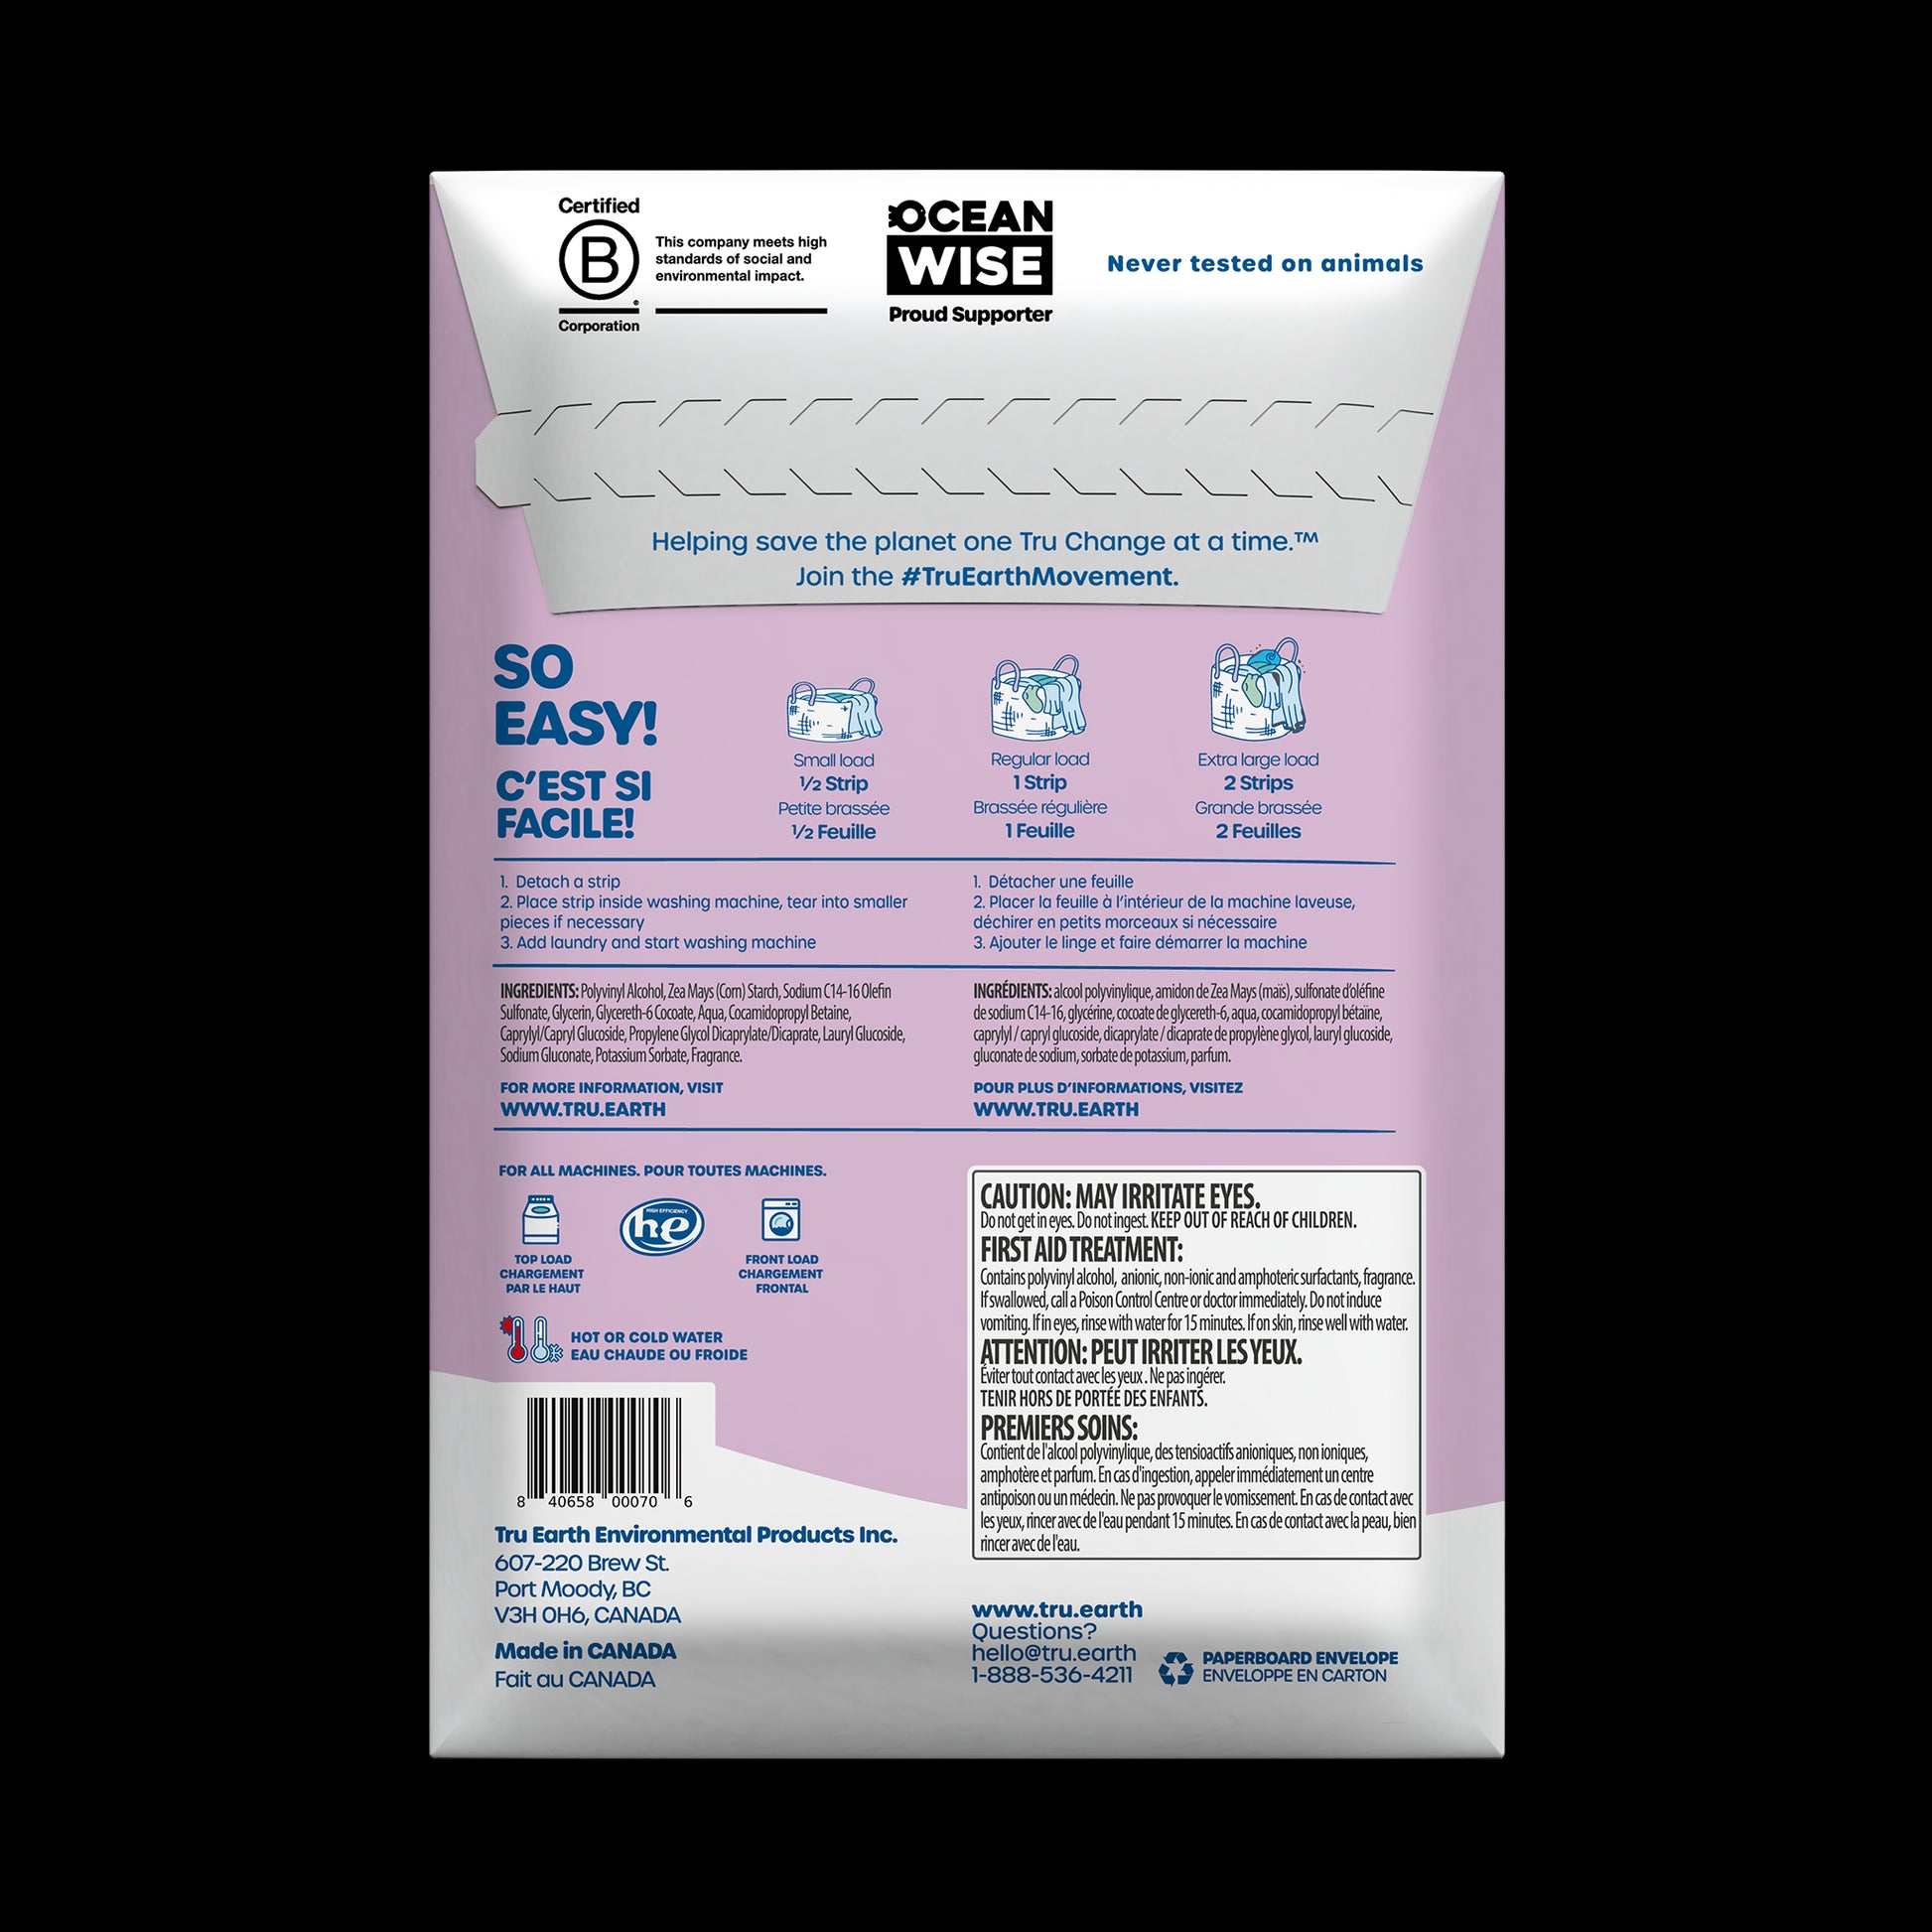 TruEarth Laundry Detergent Lilac Breeze Back of Package